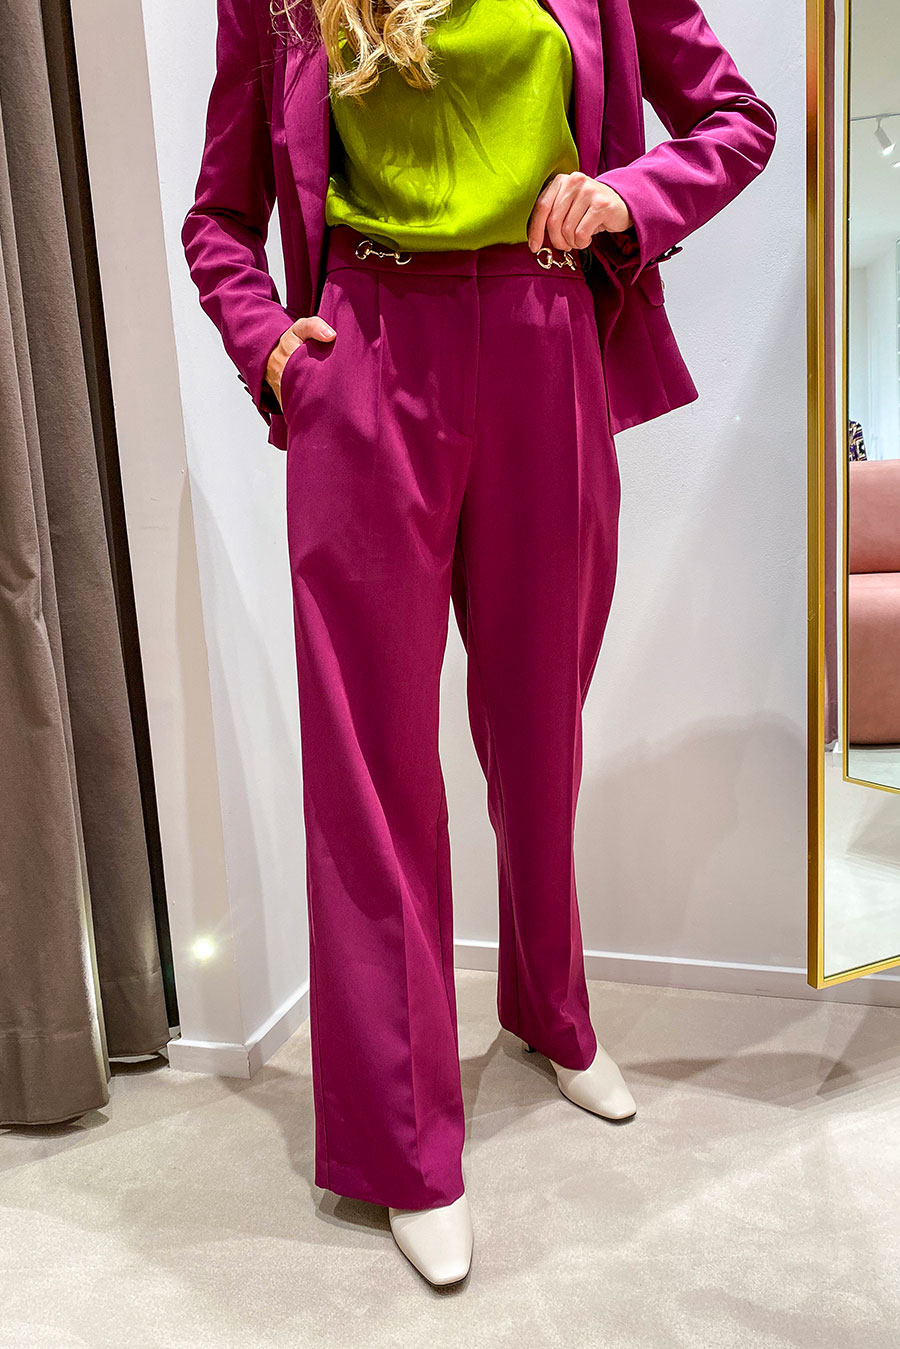 Vicolo - Burgundy palazzo trousers with golden clamps